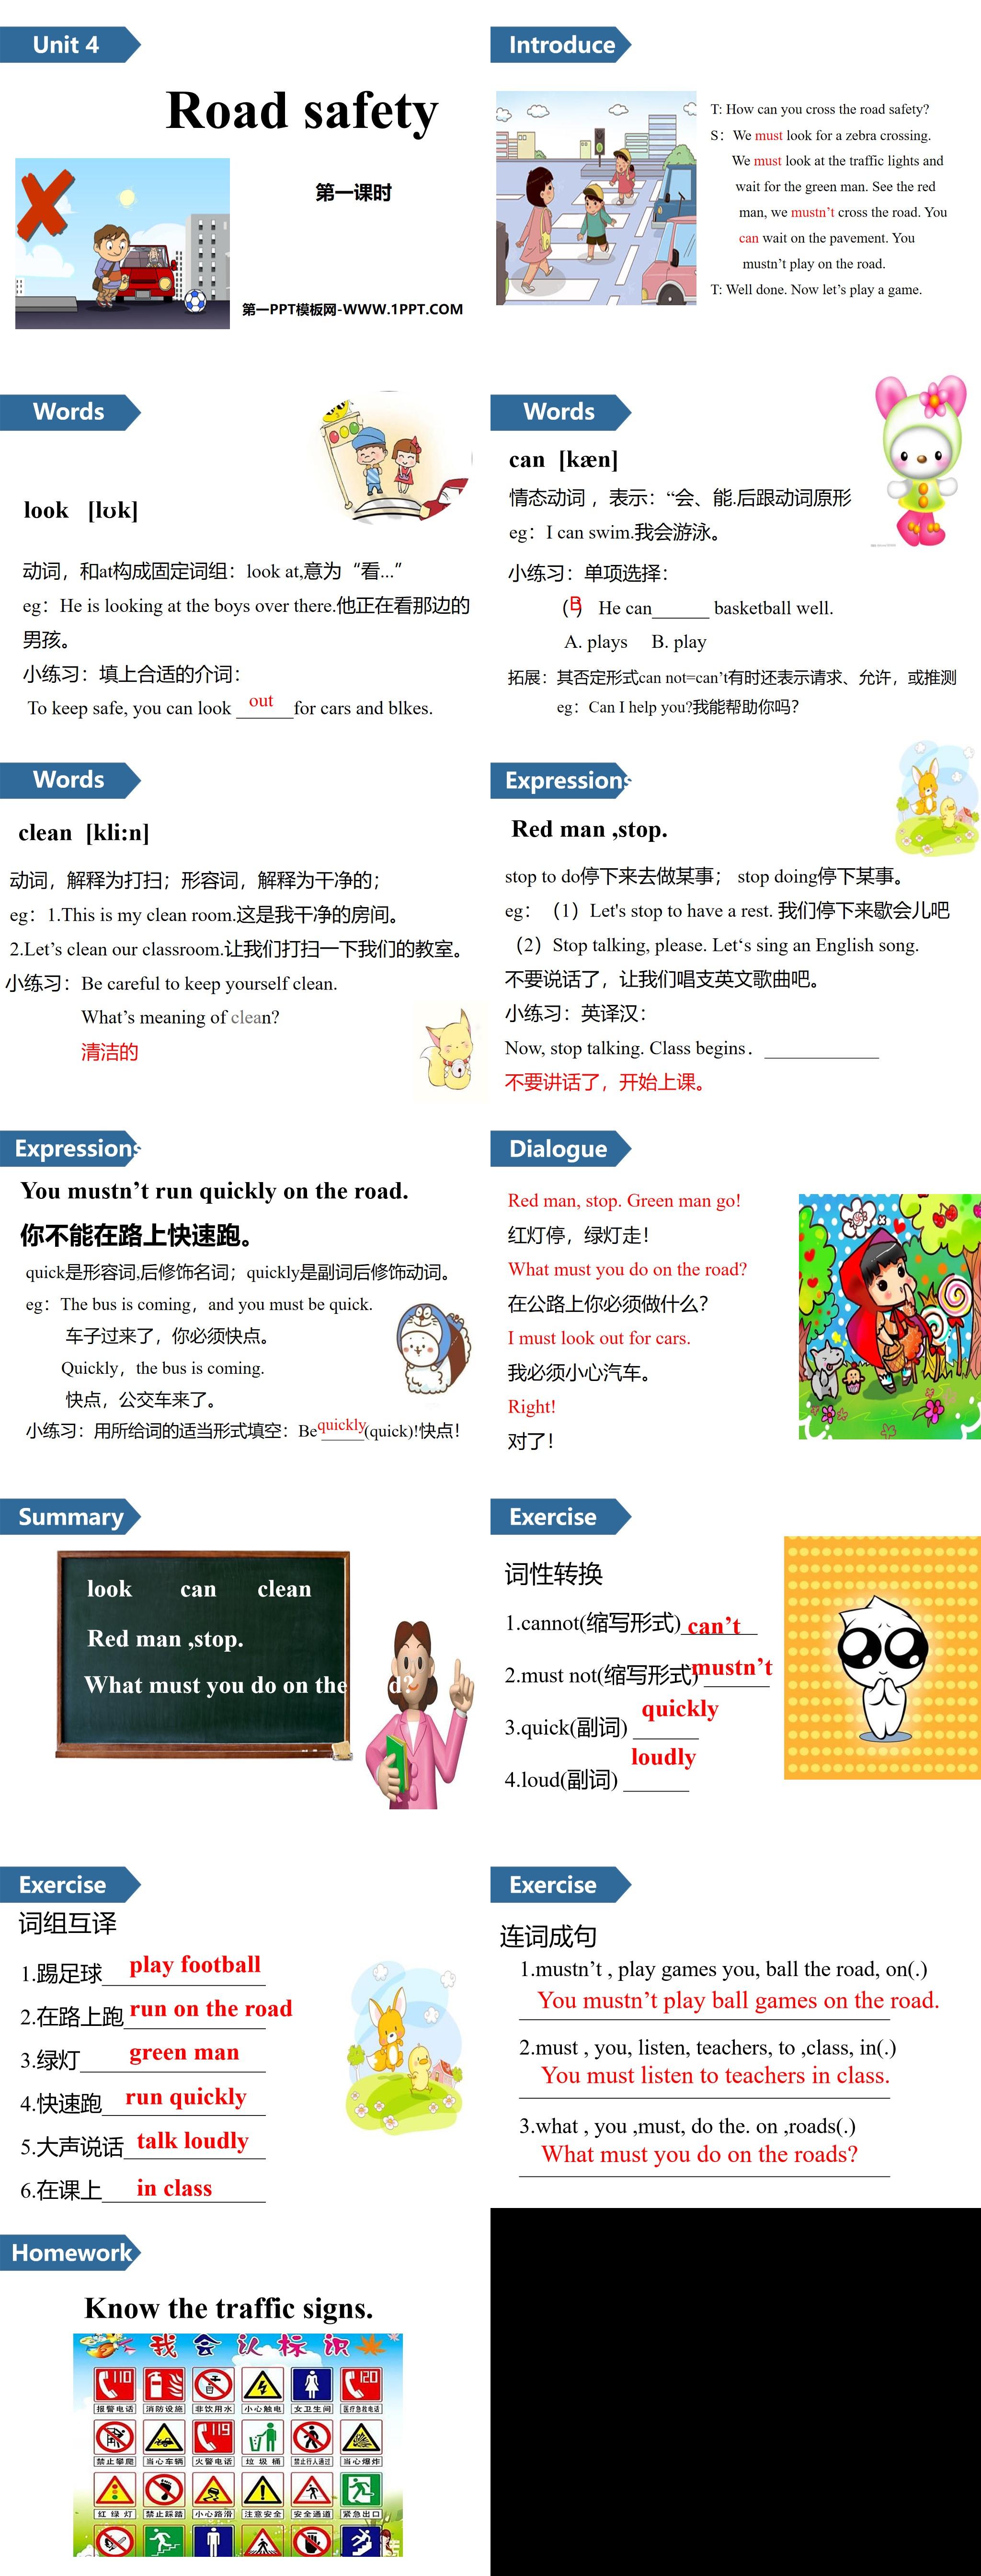 《Road safety》PPT(第一课时)
（2）